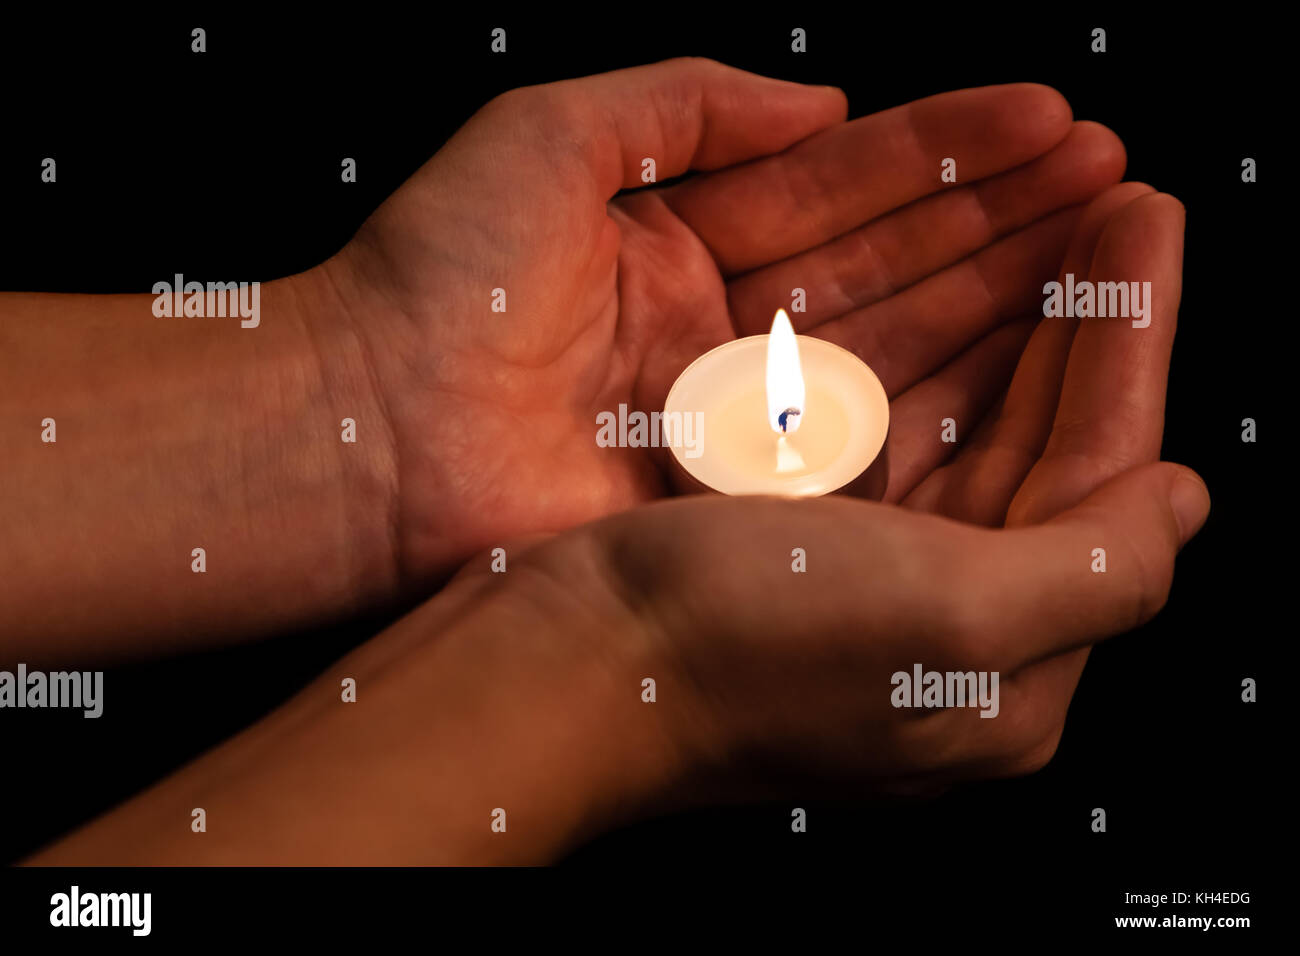 Hands holding and protecting lit or burning candle candlelight on darkness. Black background. Concept for prayer, praying, hope, vigil, night watch Stock Photo